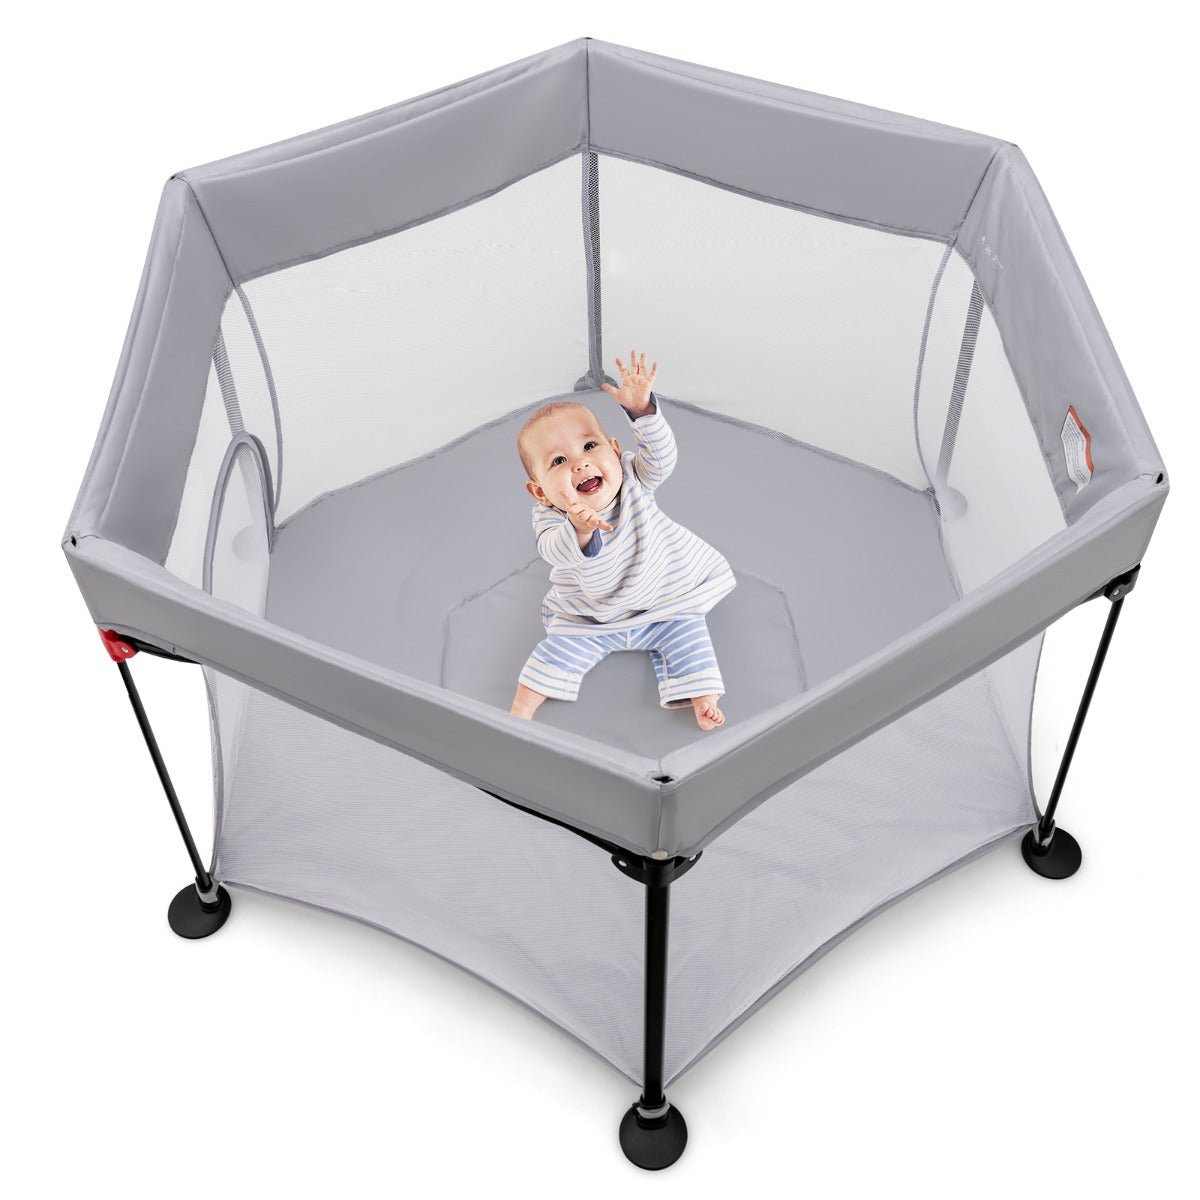 Gray Baby Playpen: Portable Design with Removable Canopy for Anywhere Use